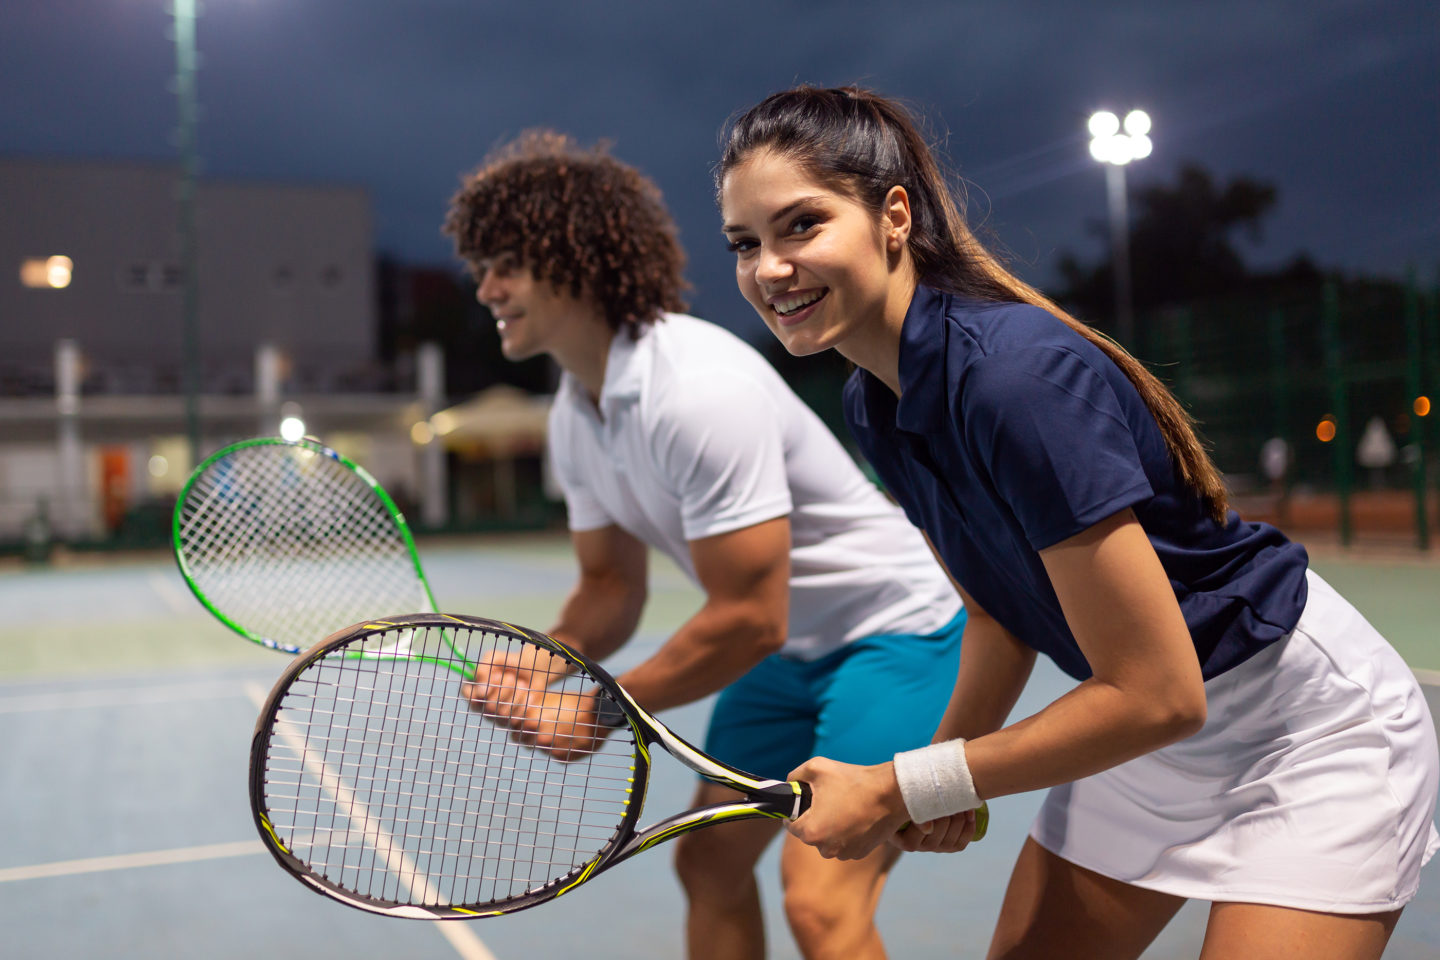 Young couple on tennis court. Handsome man and attractive woman are playing tennis.